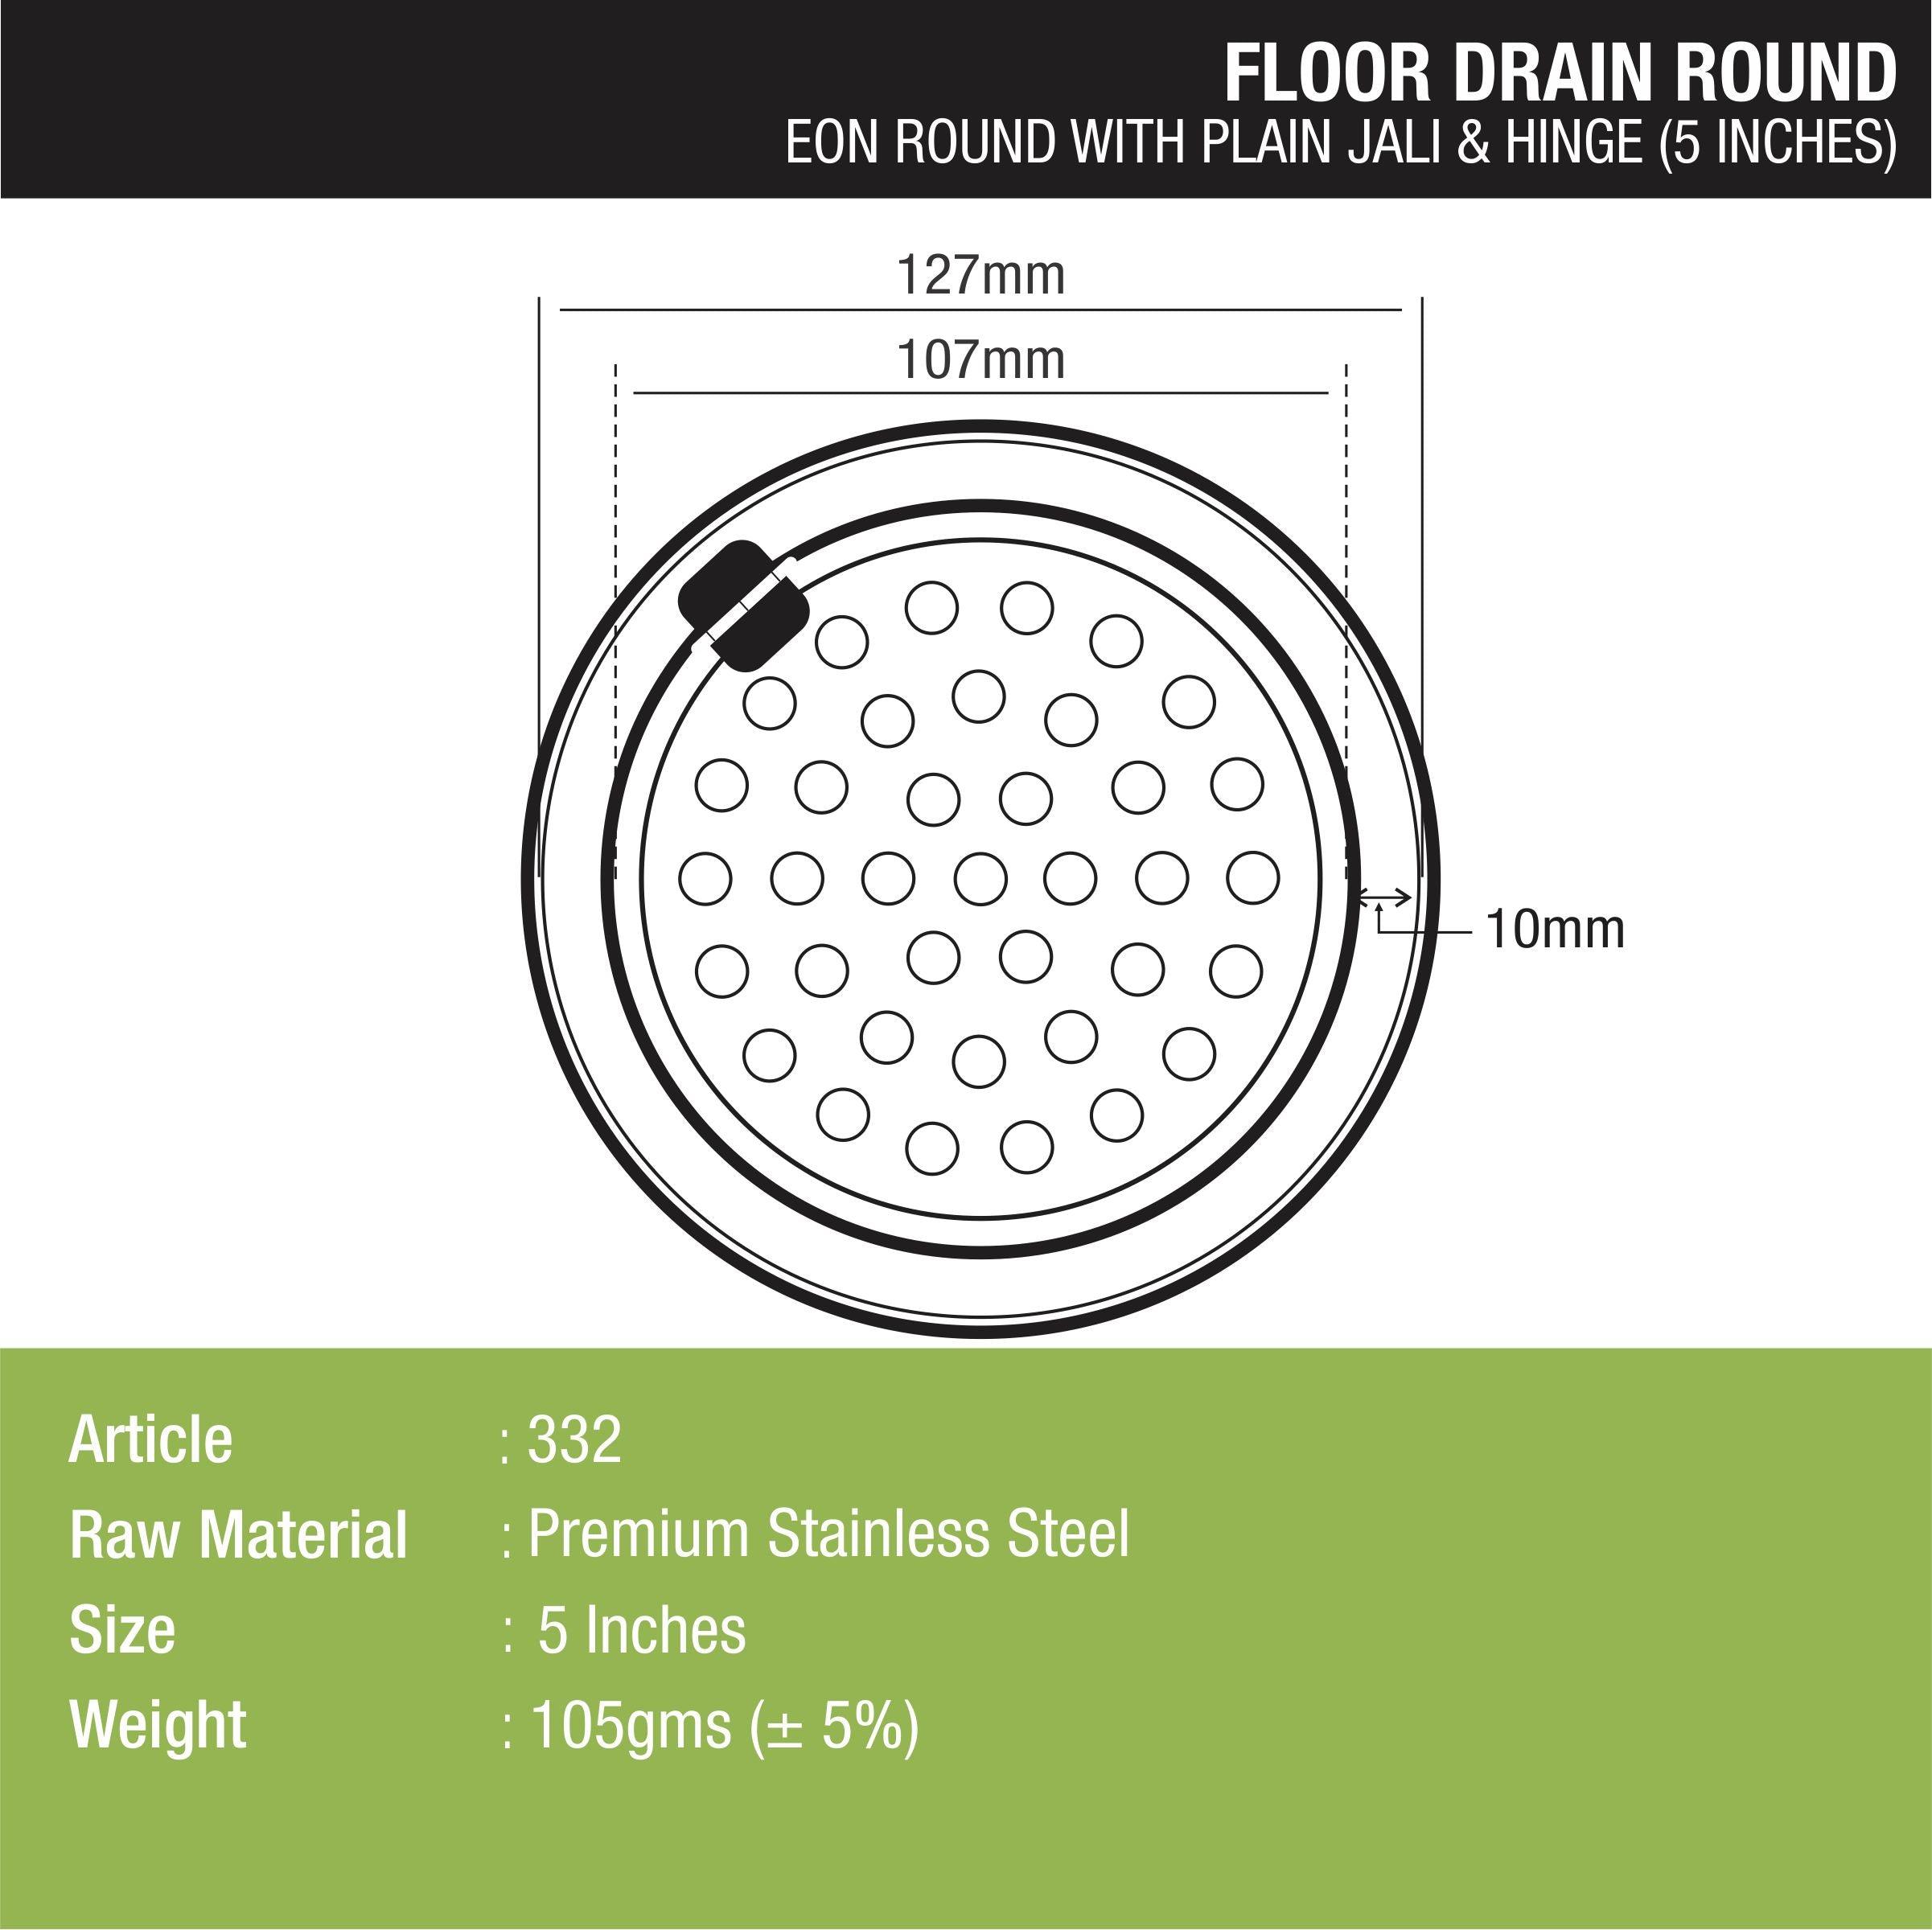 Eon Round Floor Drain with Plain Jali & Hinge (5 inches) dimensions and sizes